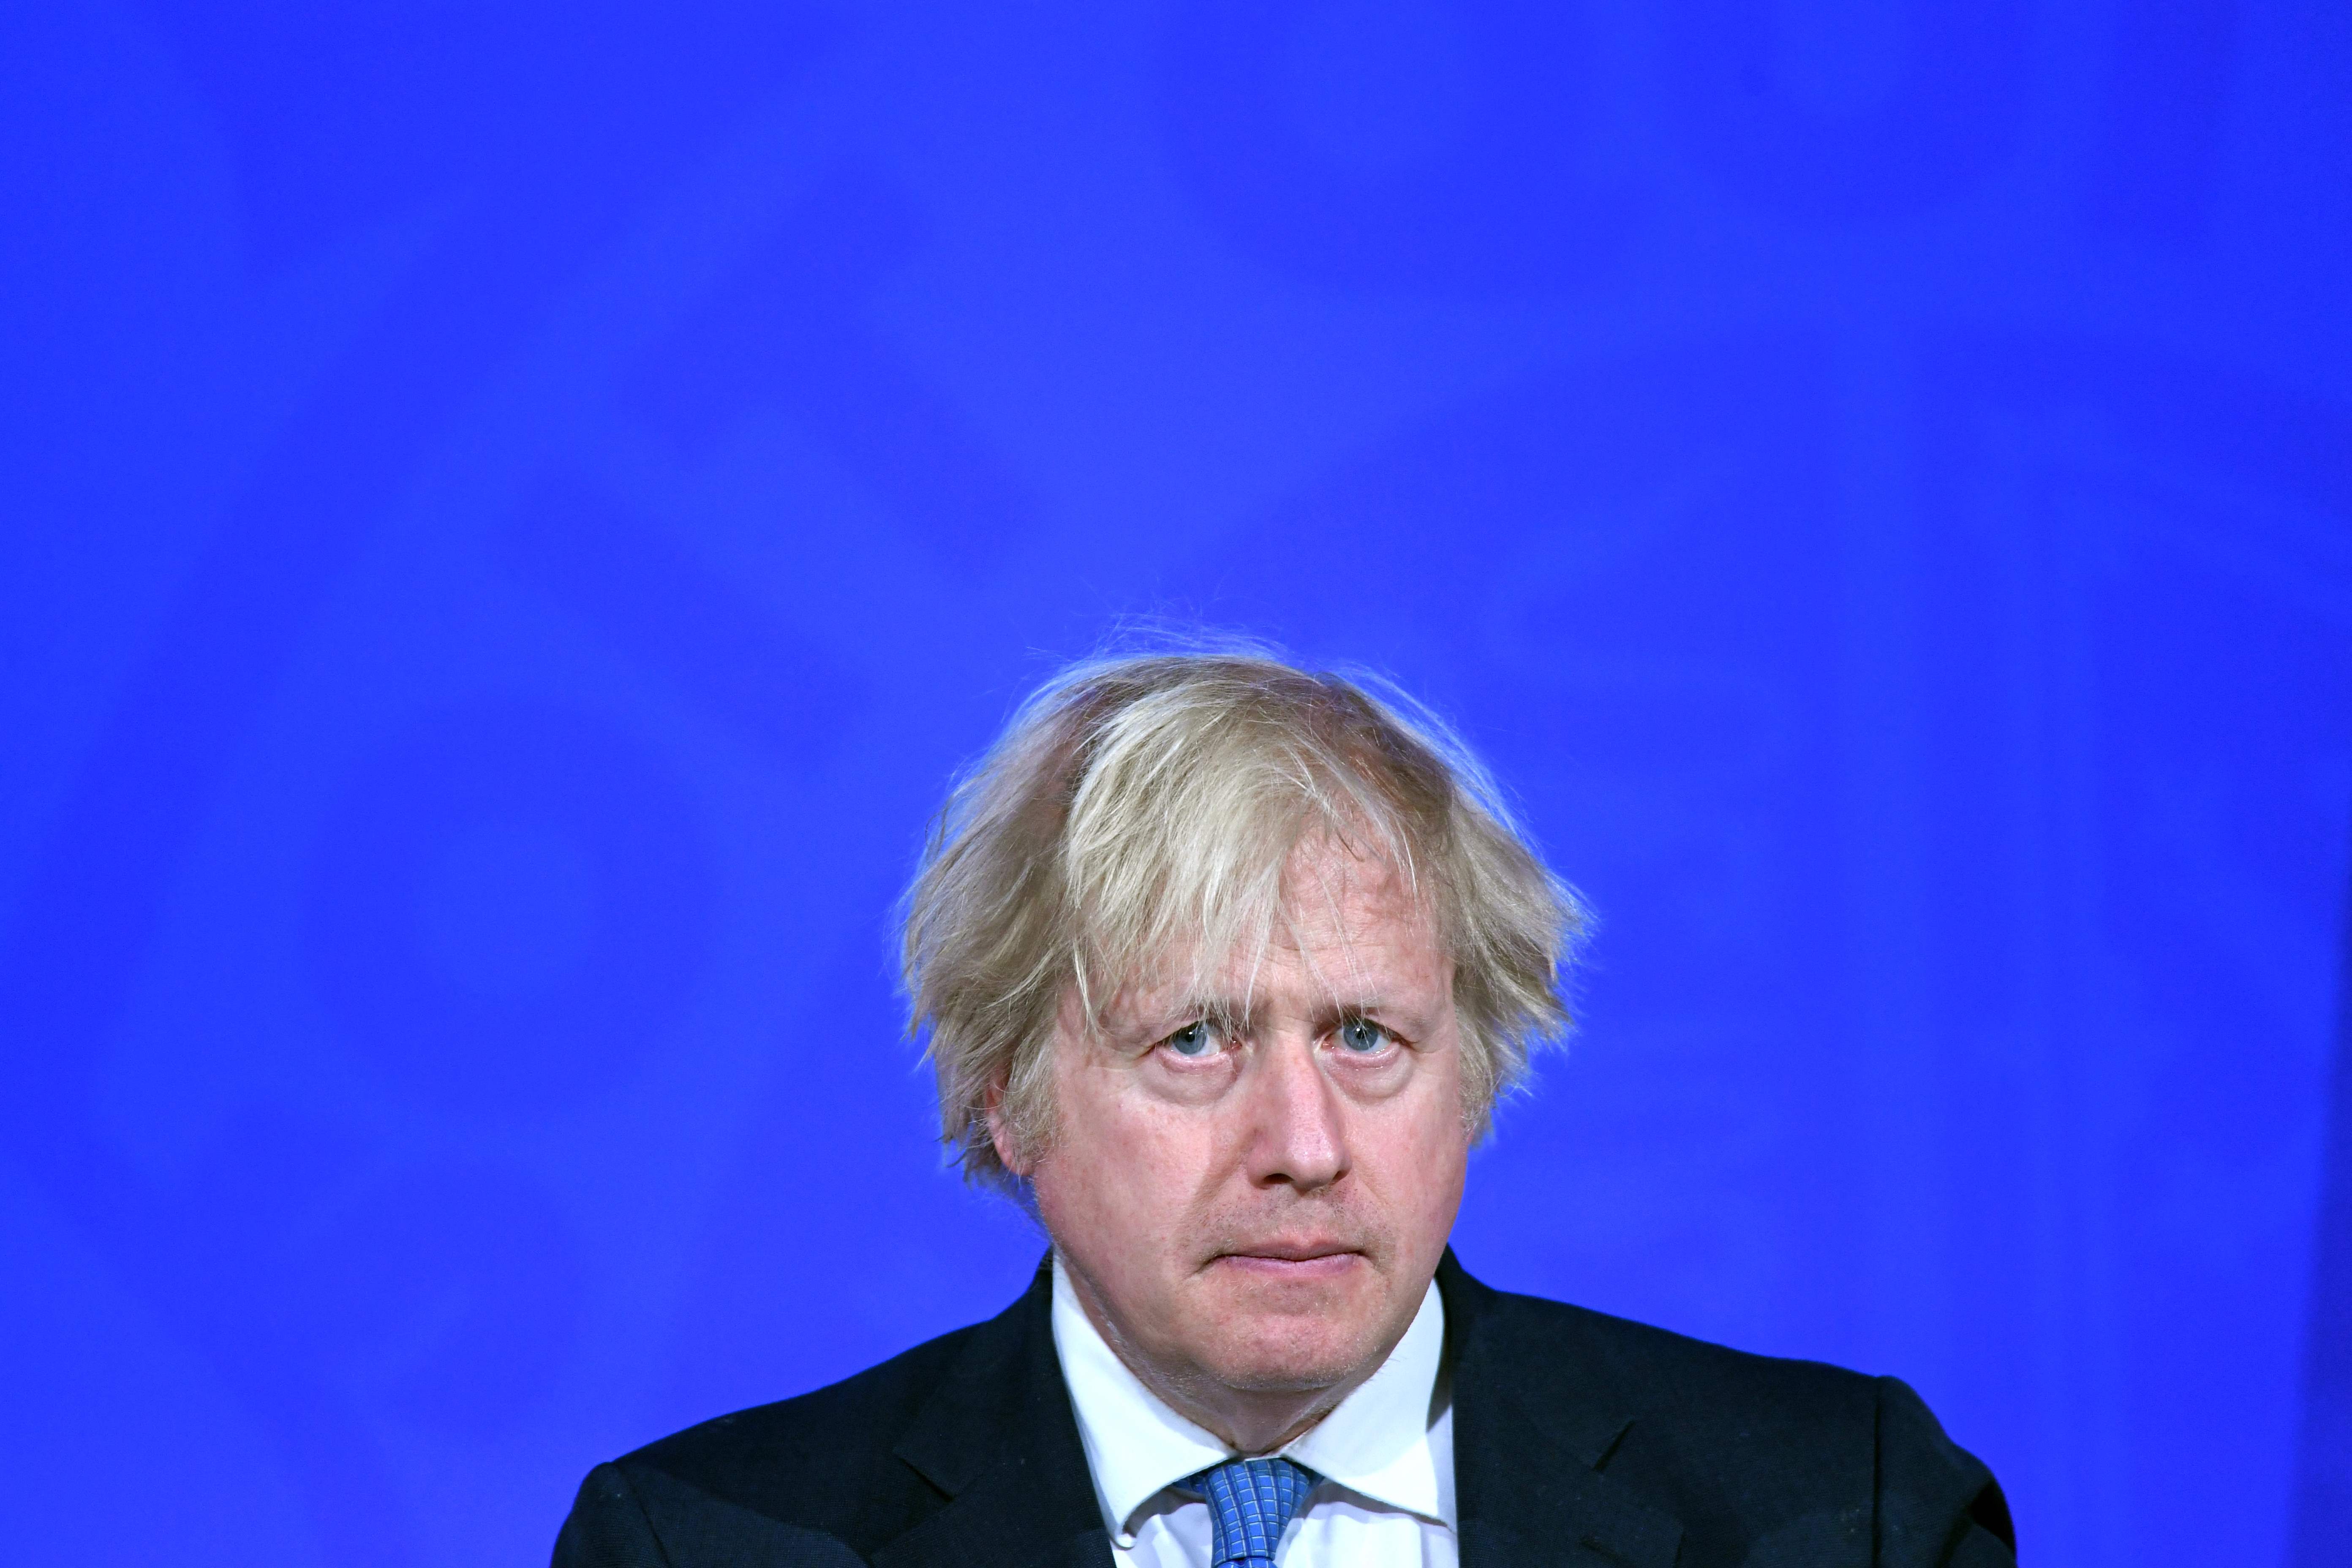 Boris Johnson is reportedly set to announce a new pledge to cut the UK’s emissions by 78 per cent by 2035, when compared to levels in 1990